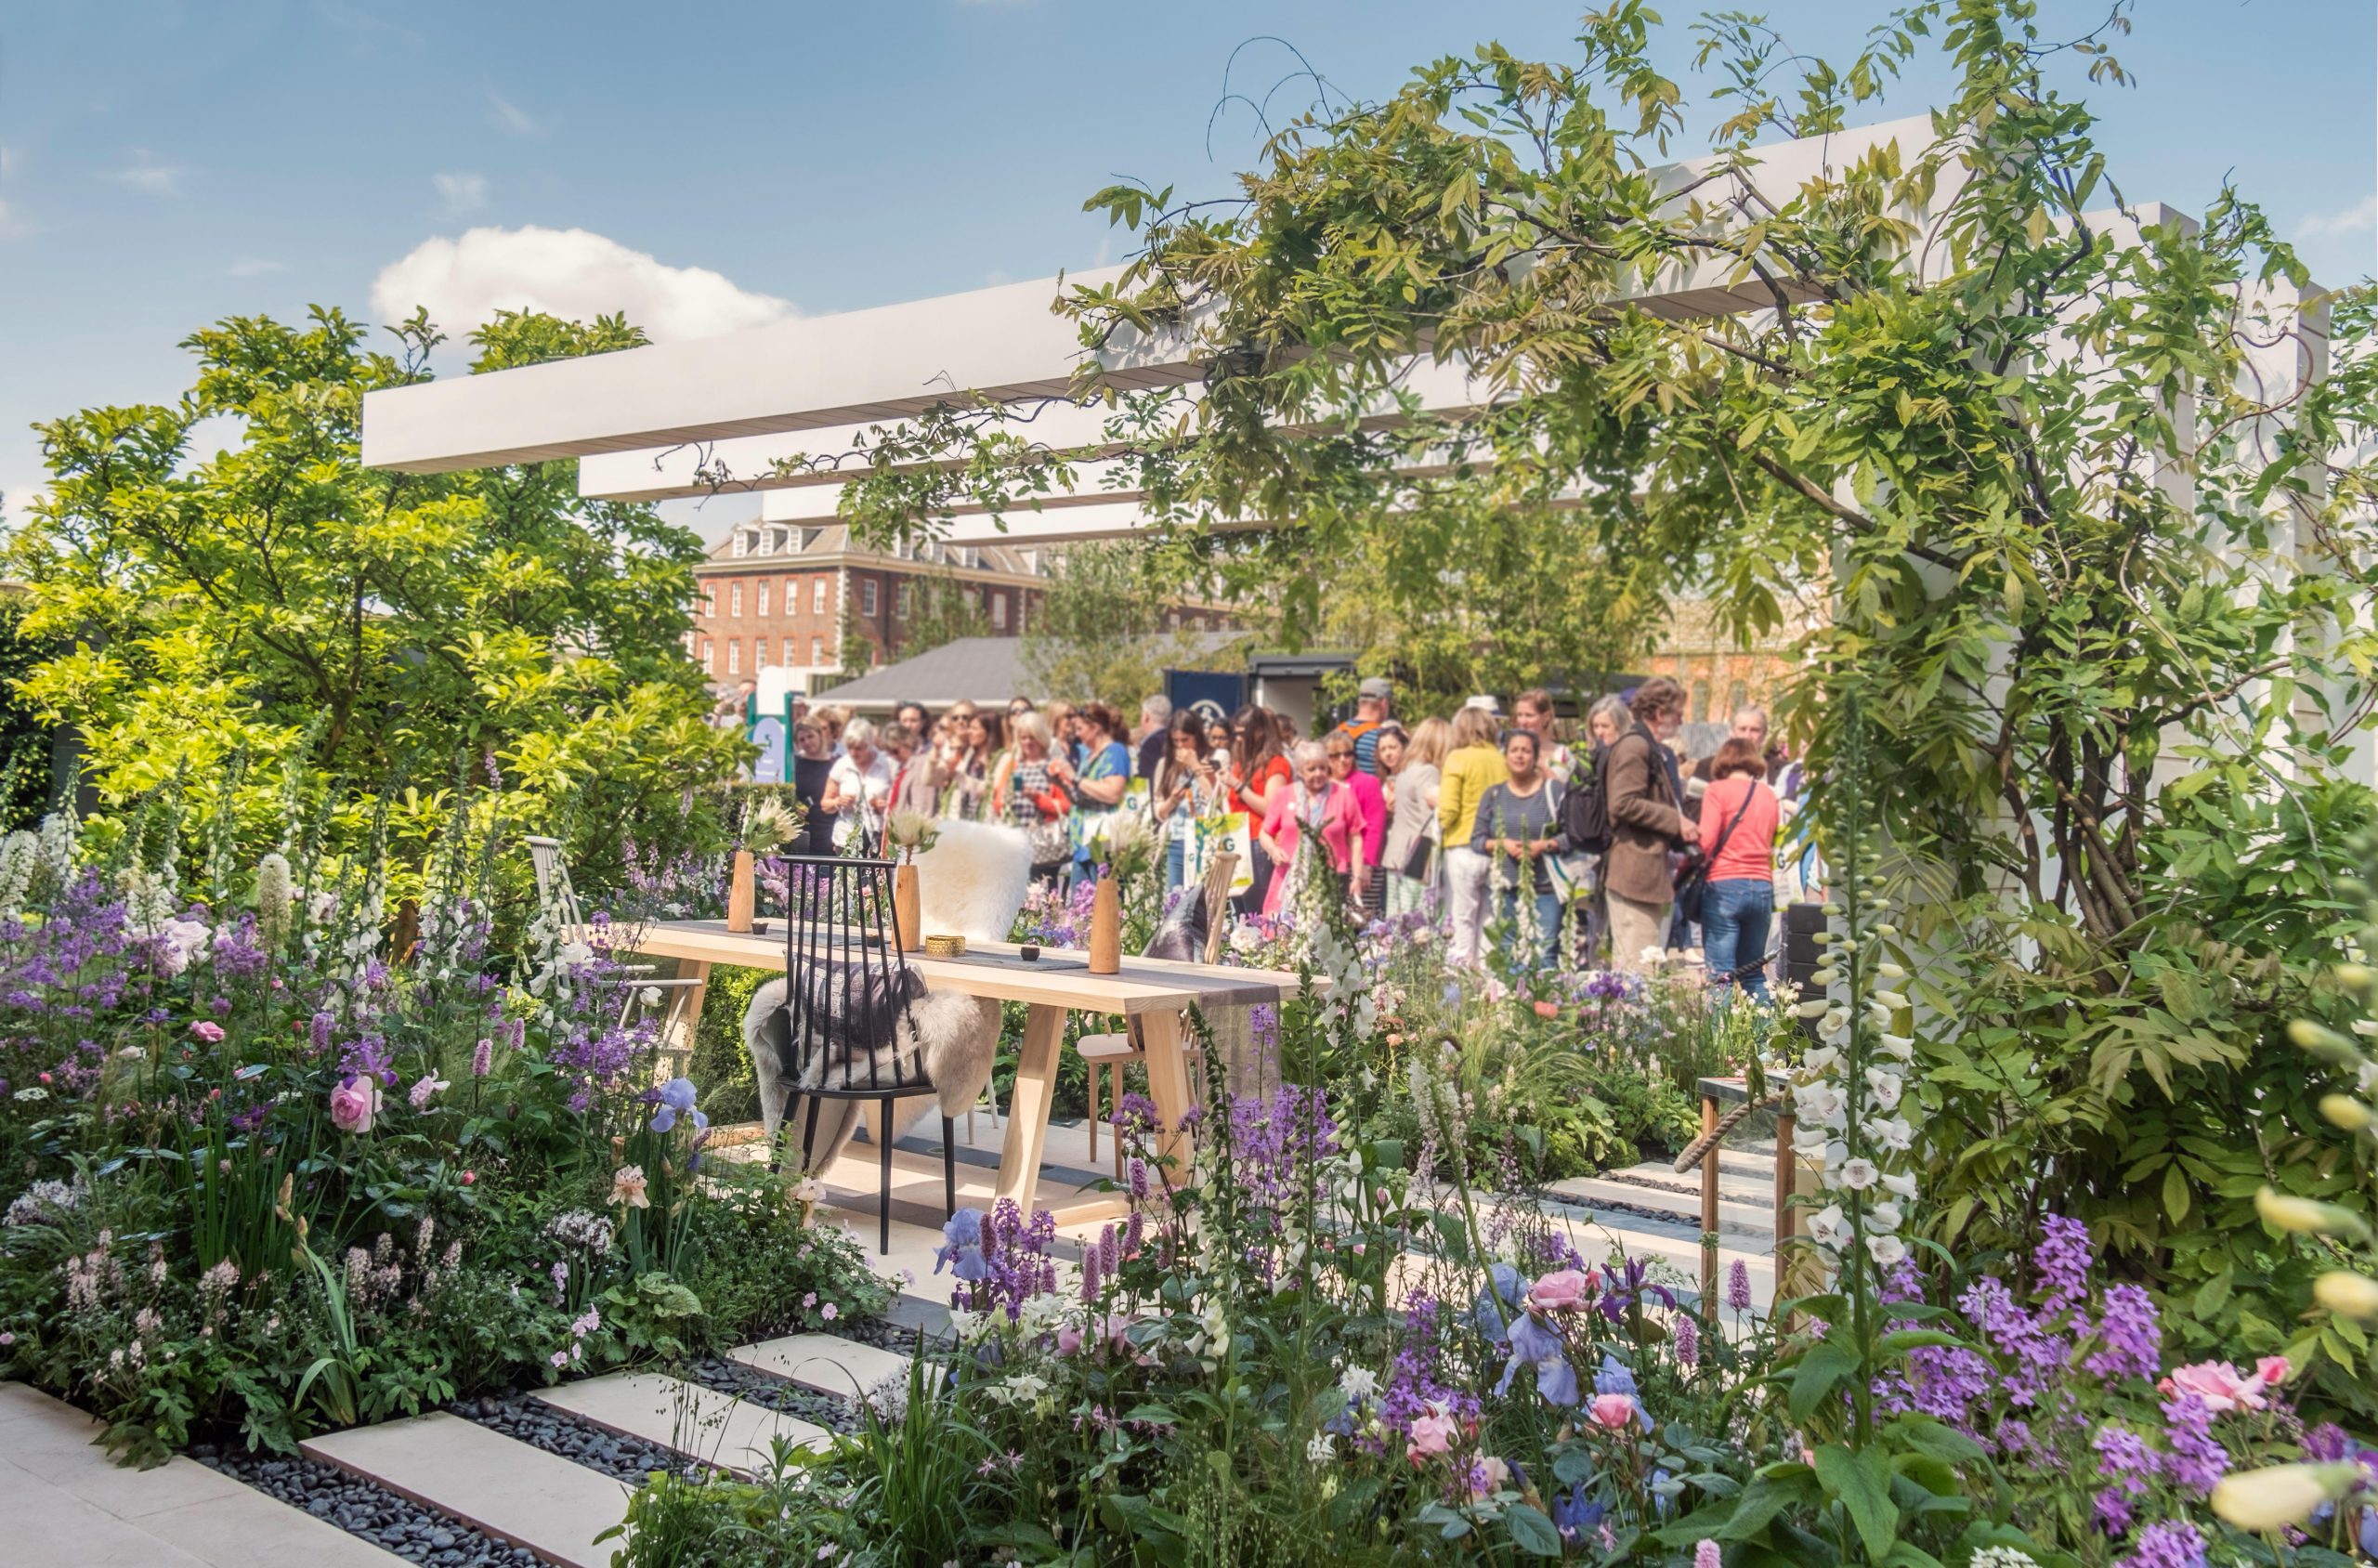 With 108 years of shows behind them, the Royal Horticultural Society needed our insight to help reschedule its renowned Chelsea Flower Show